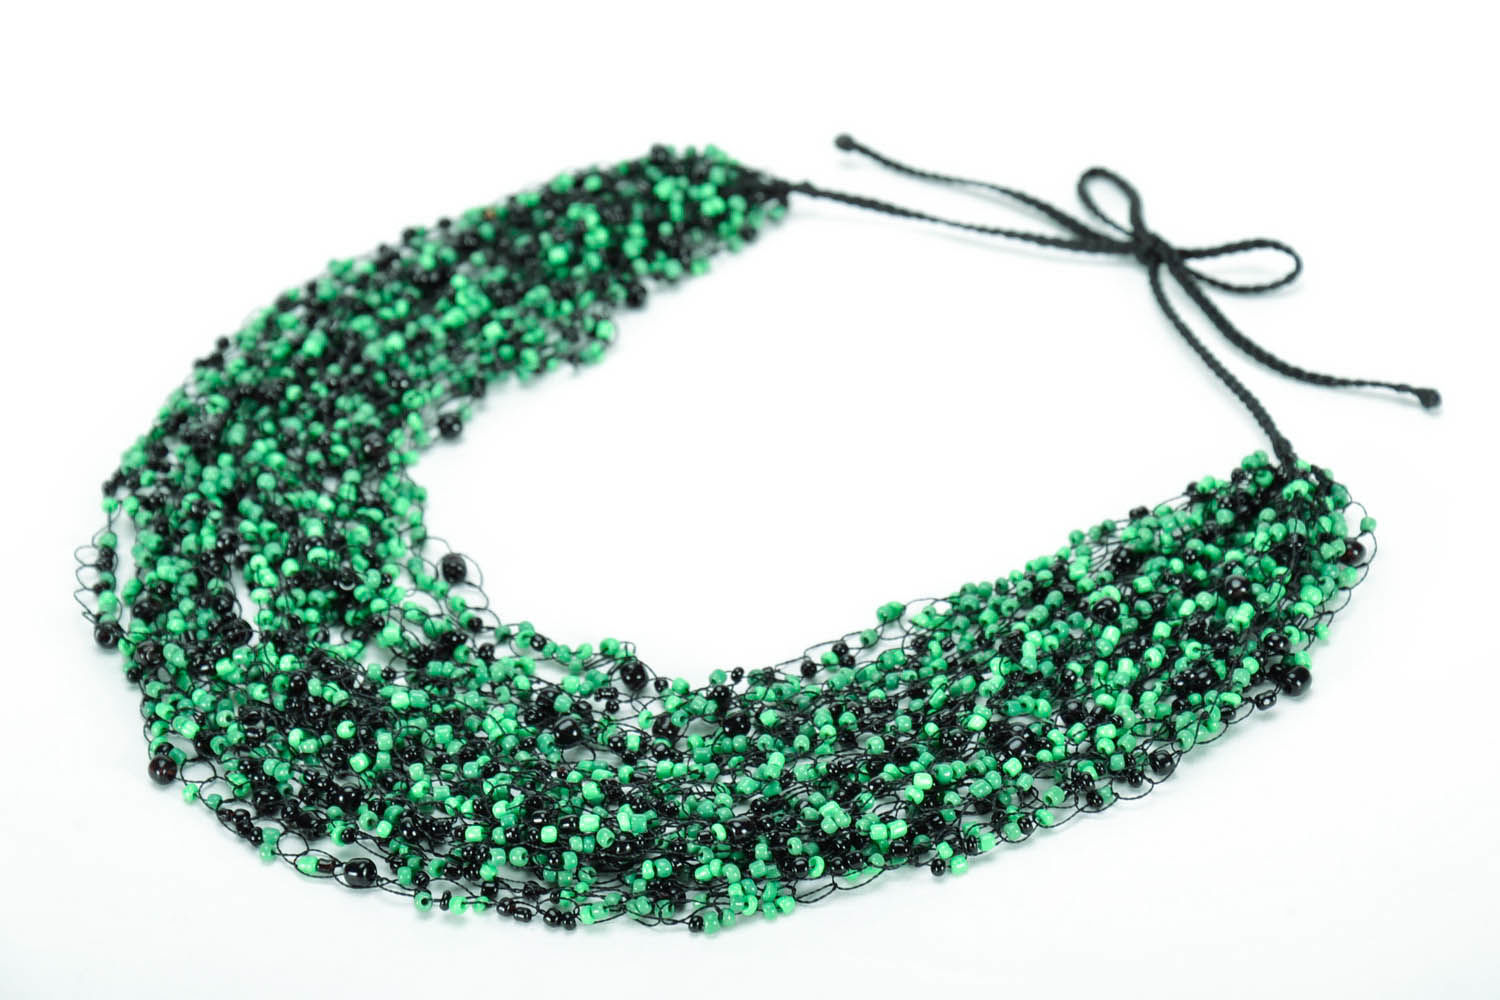 Crocheted bead necklace photo 1